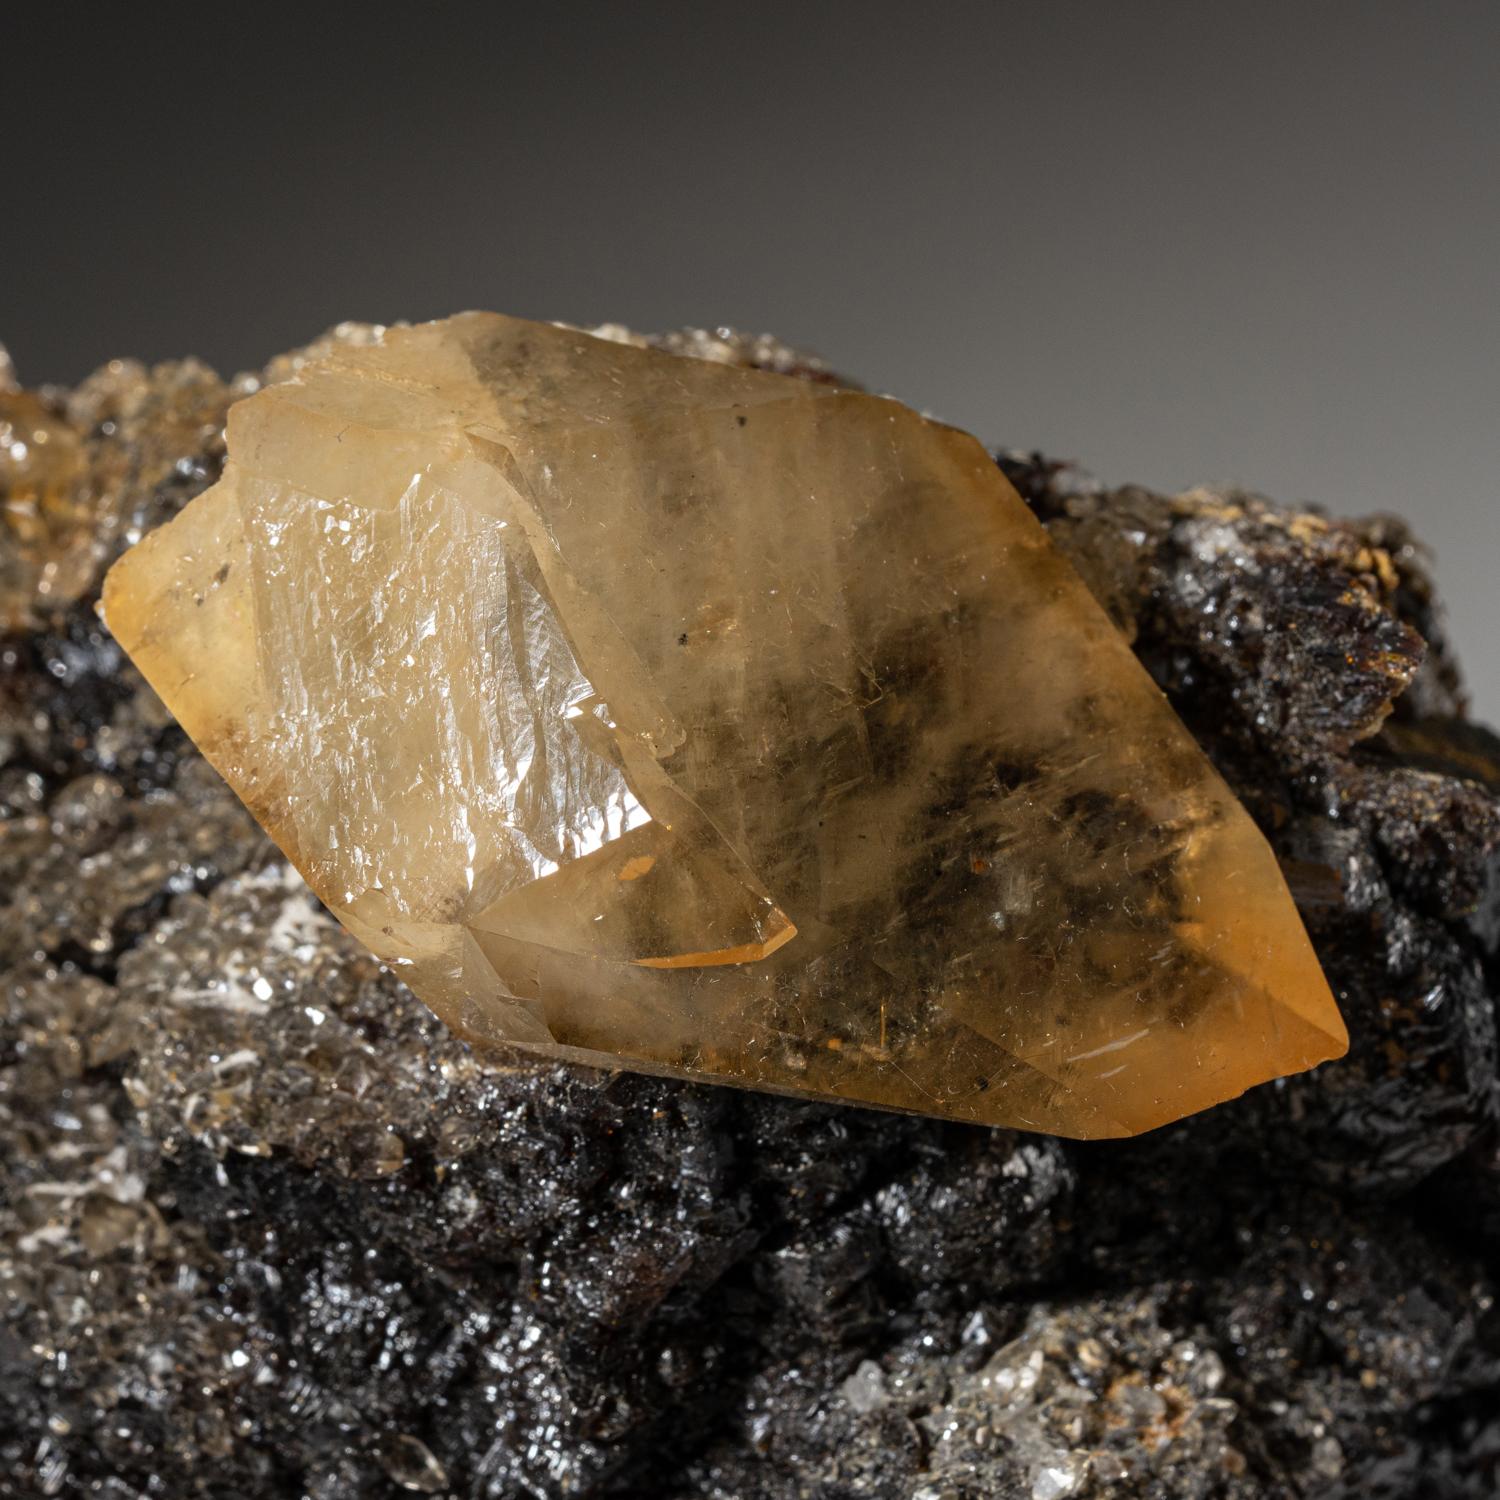 Lustrous transparent deep golden calcite crystal on small sphalerite matrix. Large double terminated scalenohedral twinned on the C-axis with well defined re-entrant faces, with sub parallel crystal growth. It's an exquisite example of twinned